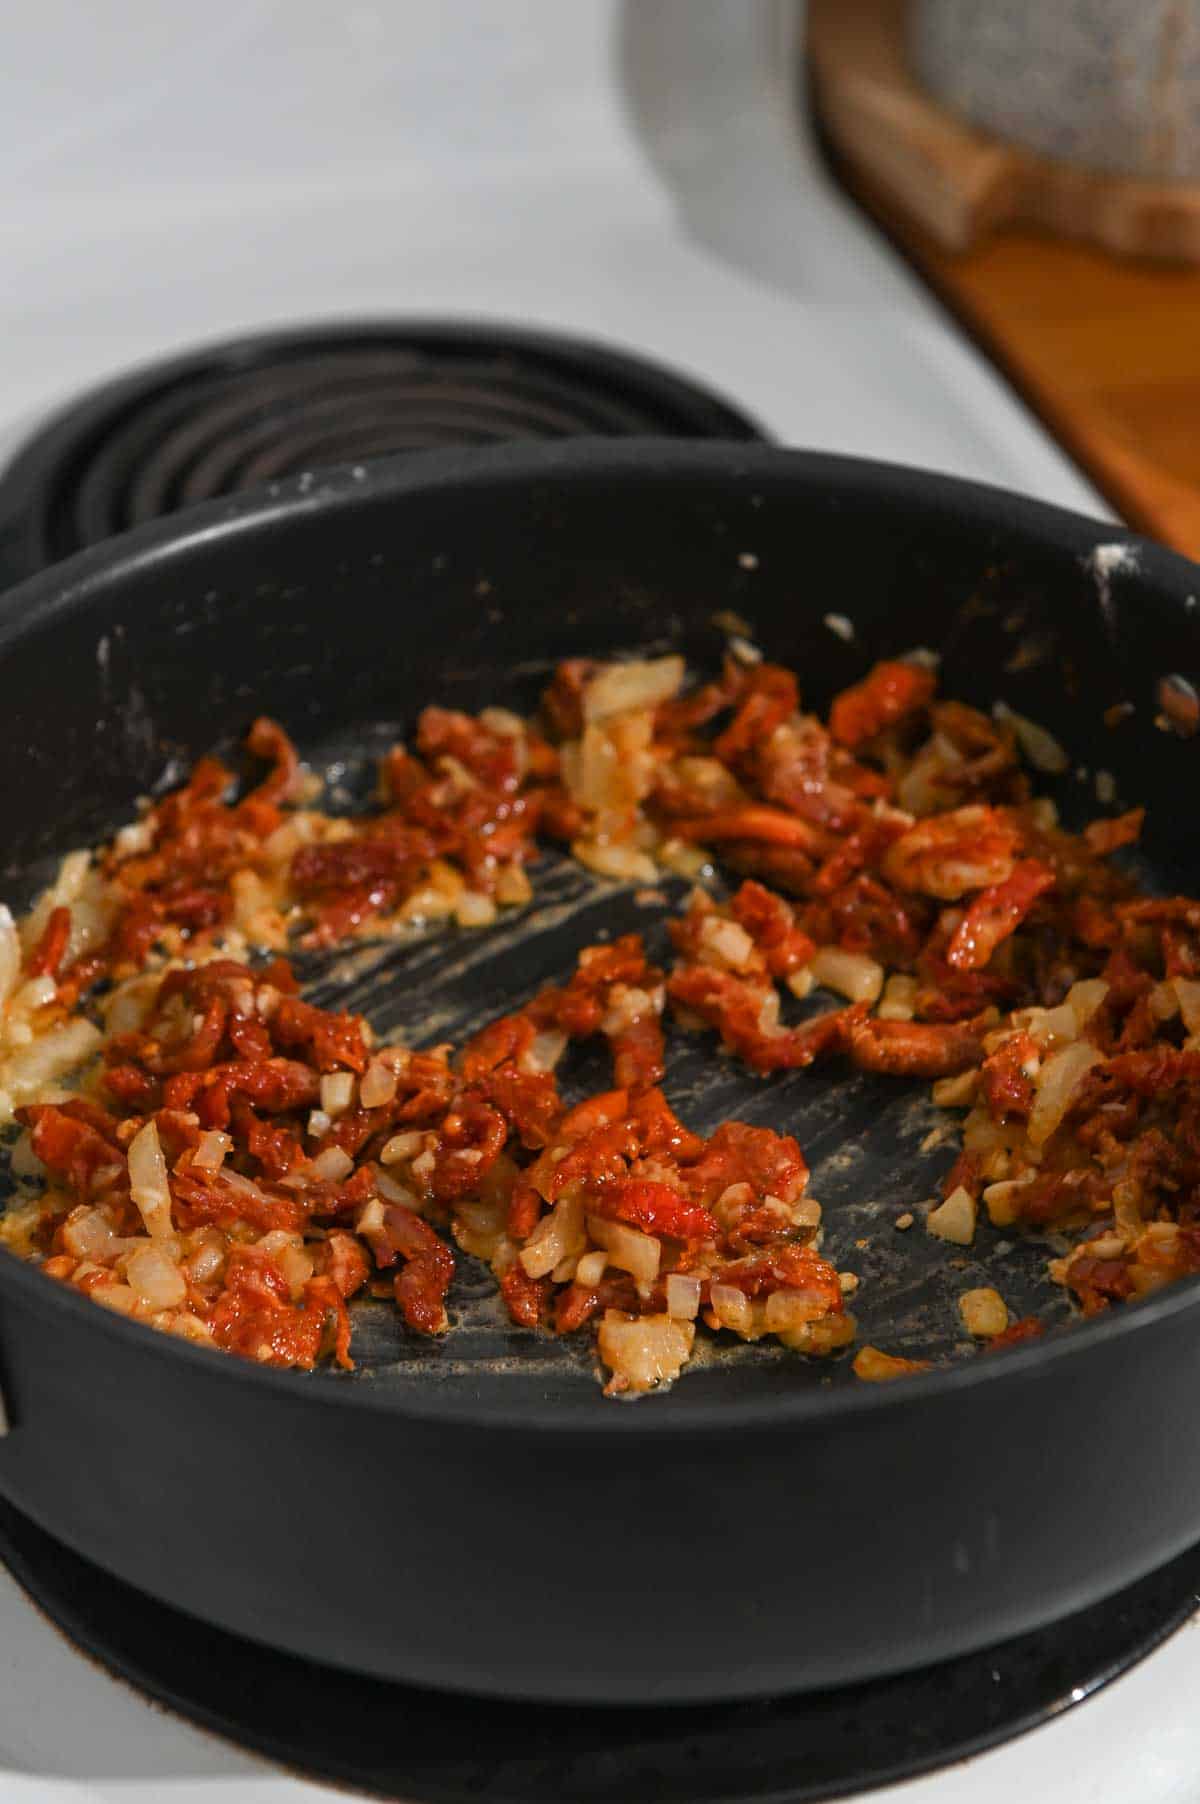 Flour, sundried tomatoes, and onions sautéing in a black skillet.